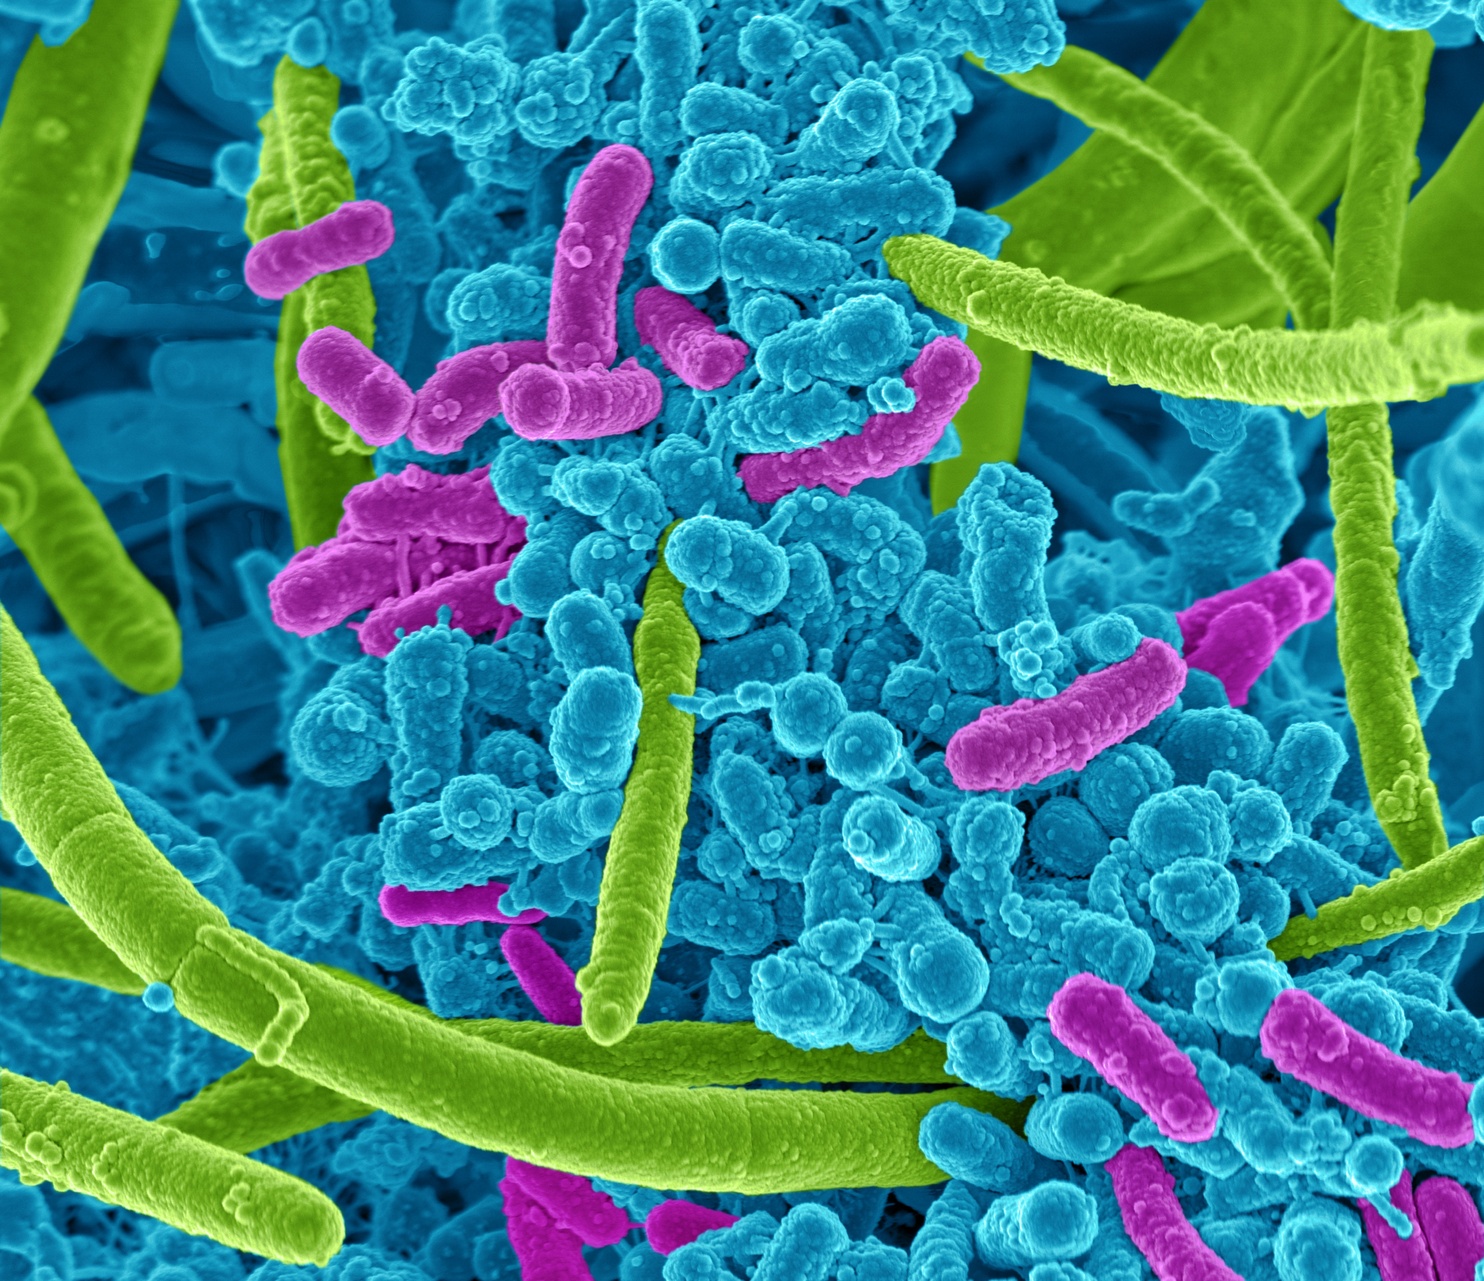 Exploring Microbiome Innovation: Insights from the Microbiome One Health Conference